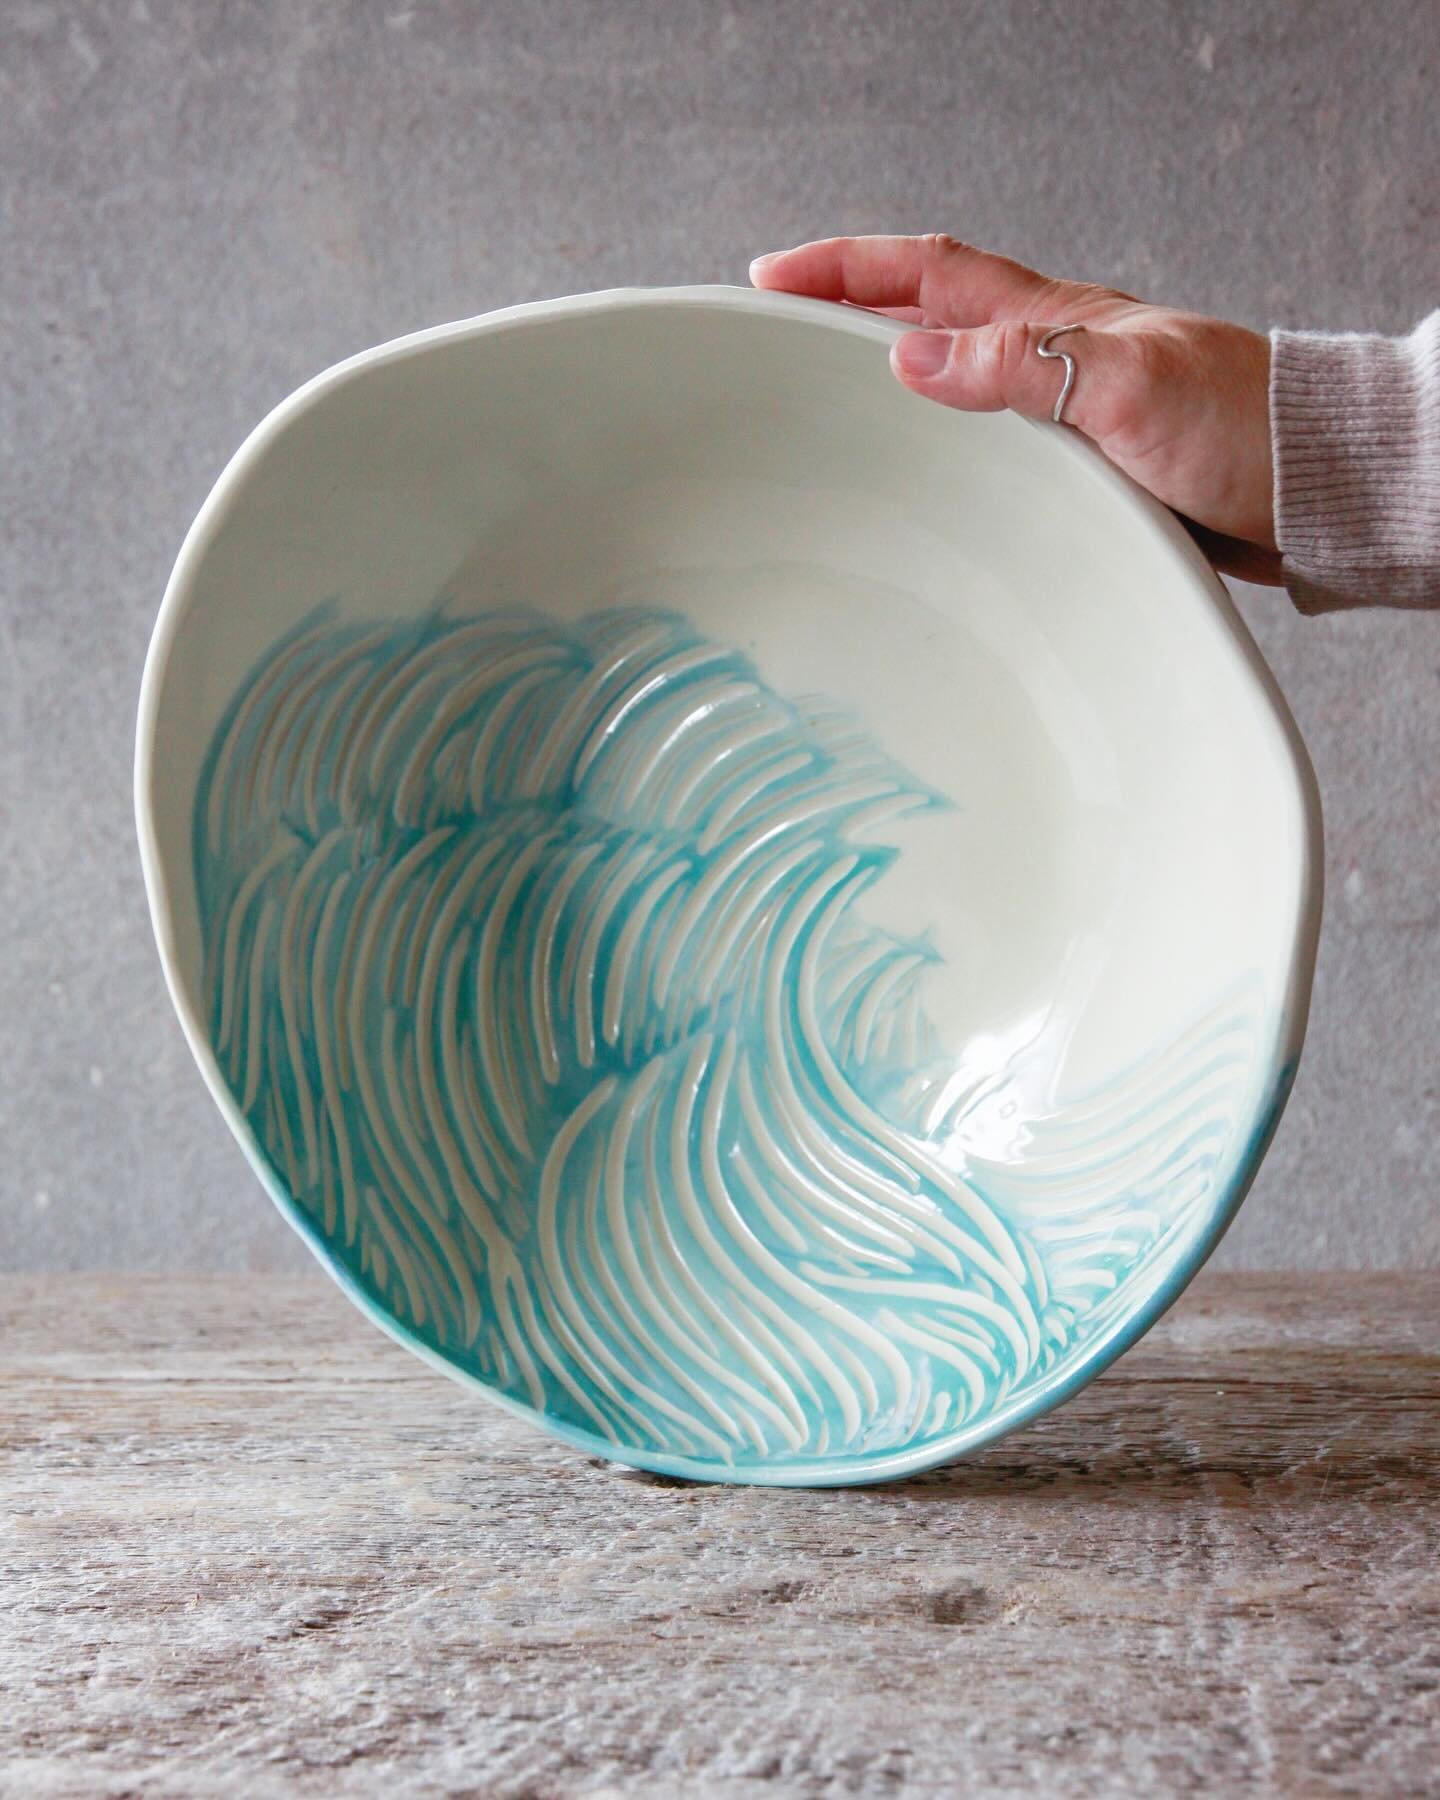 Love big bowls AND helping to conserve marine ecosystems? 

The annual @mersociety fundraiser auction is on now and this large wave bowl is available for bid! 

Give their page a follow and click their links to the auction site to check out all the a